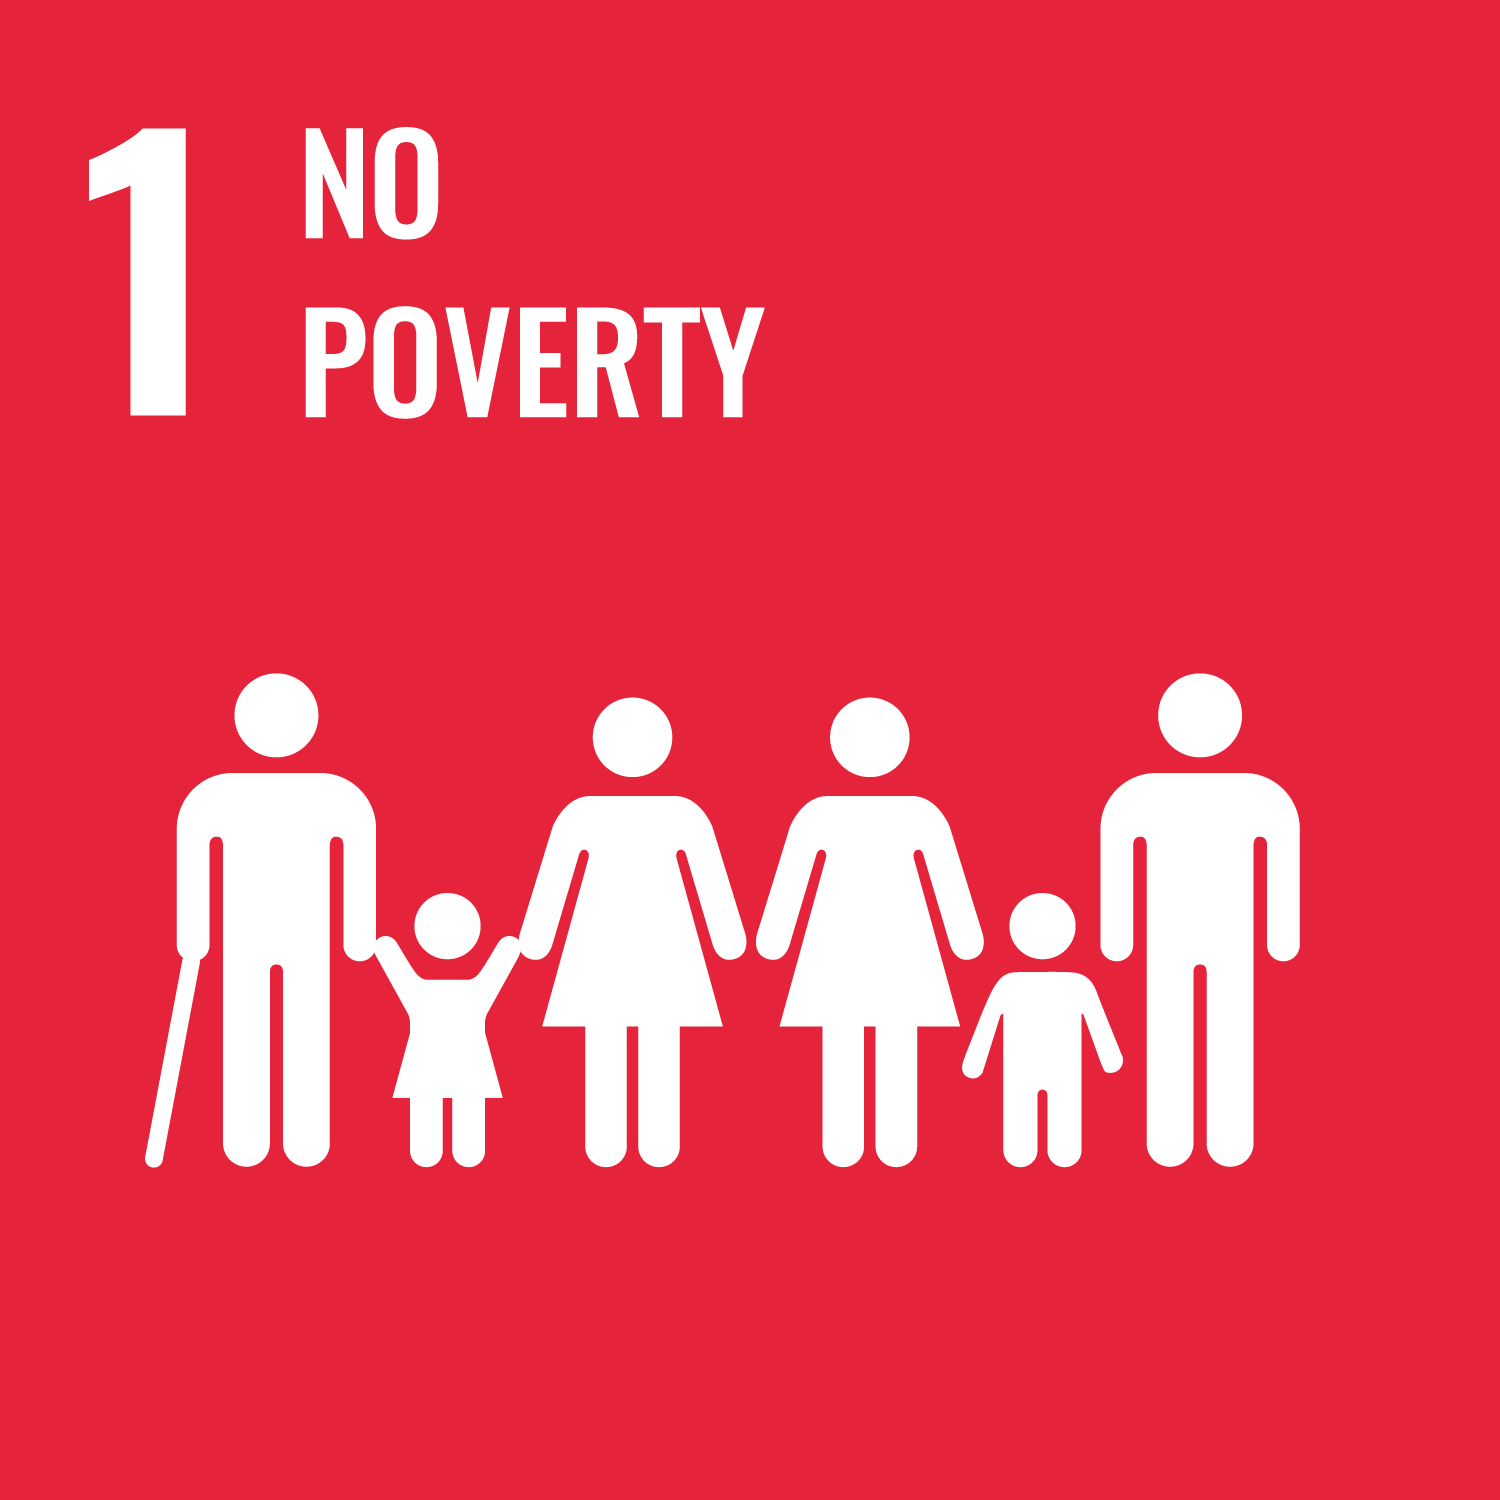 Goal number 1 of the SDGs: No Poverty